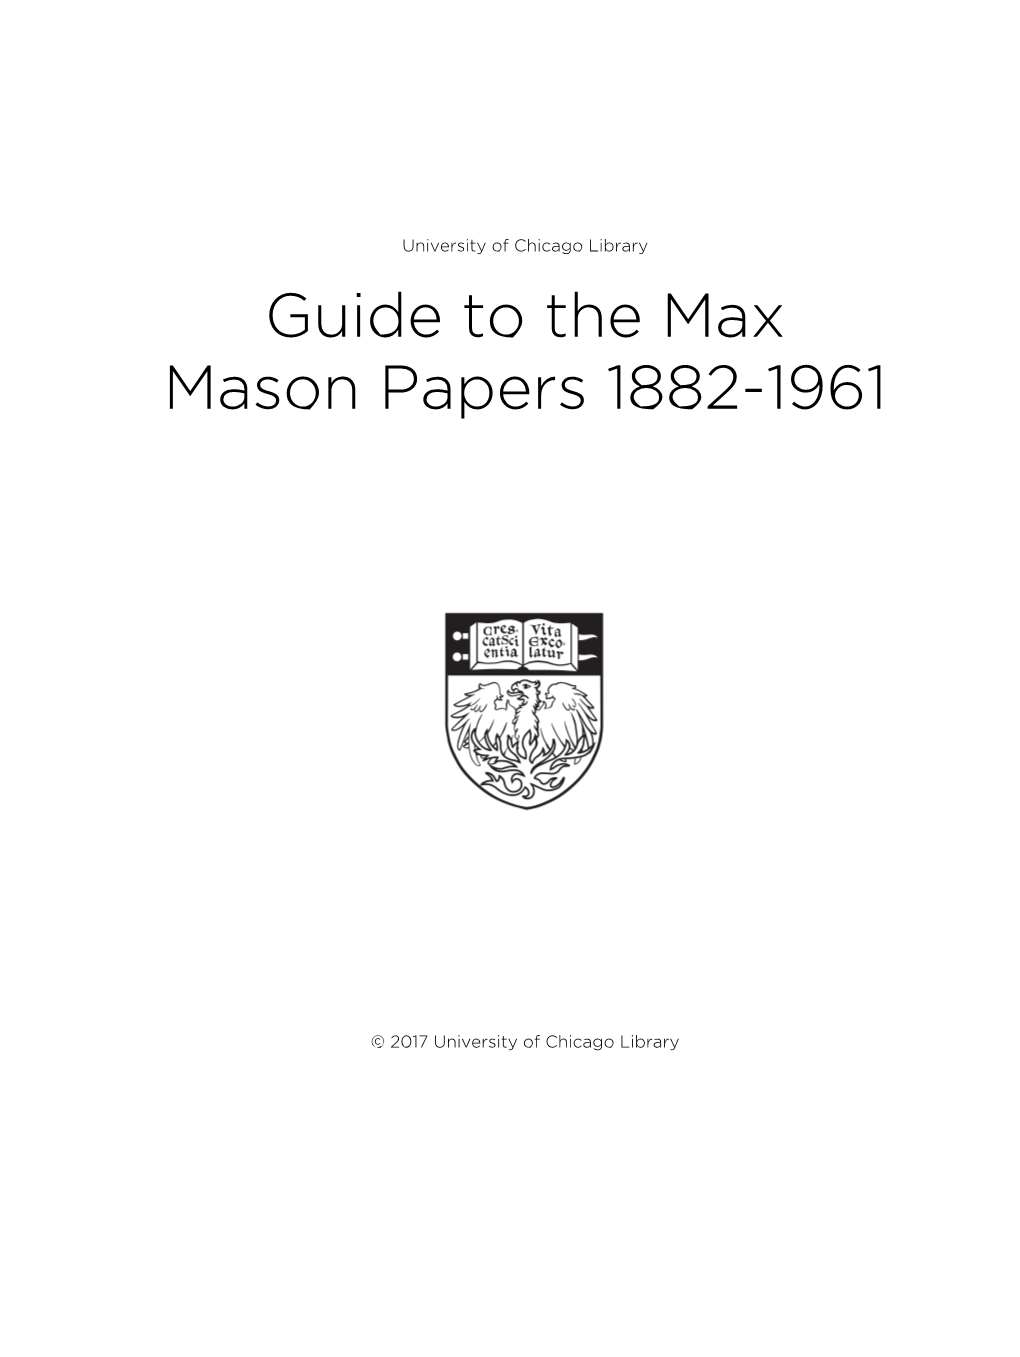 Guide to the Max Mason Papers 1882-1961